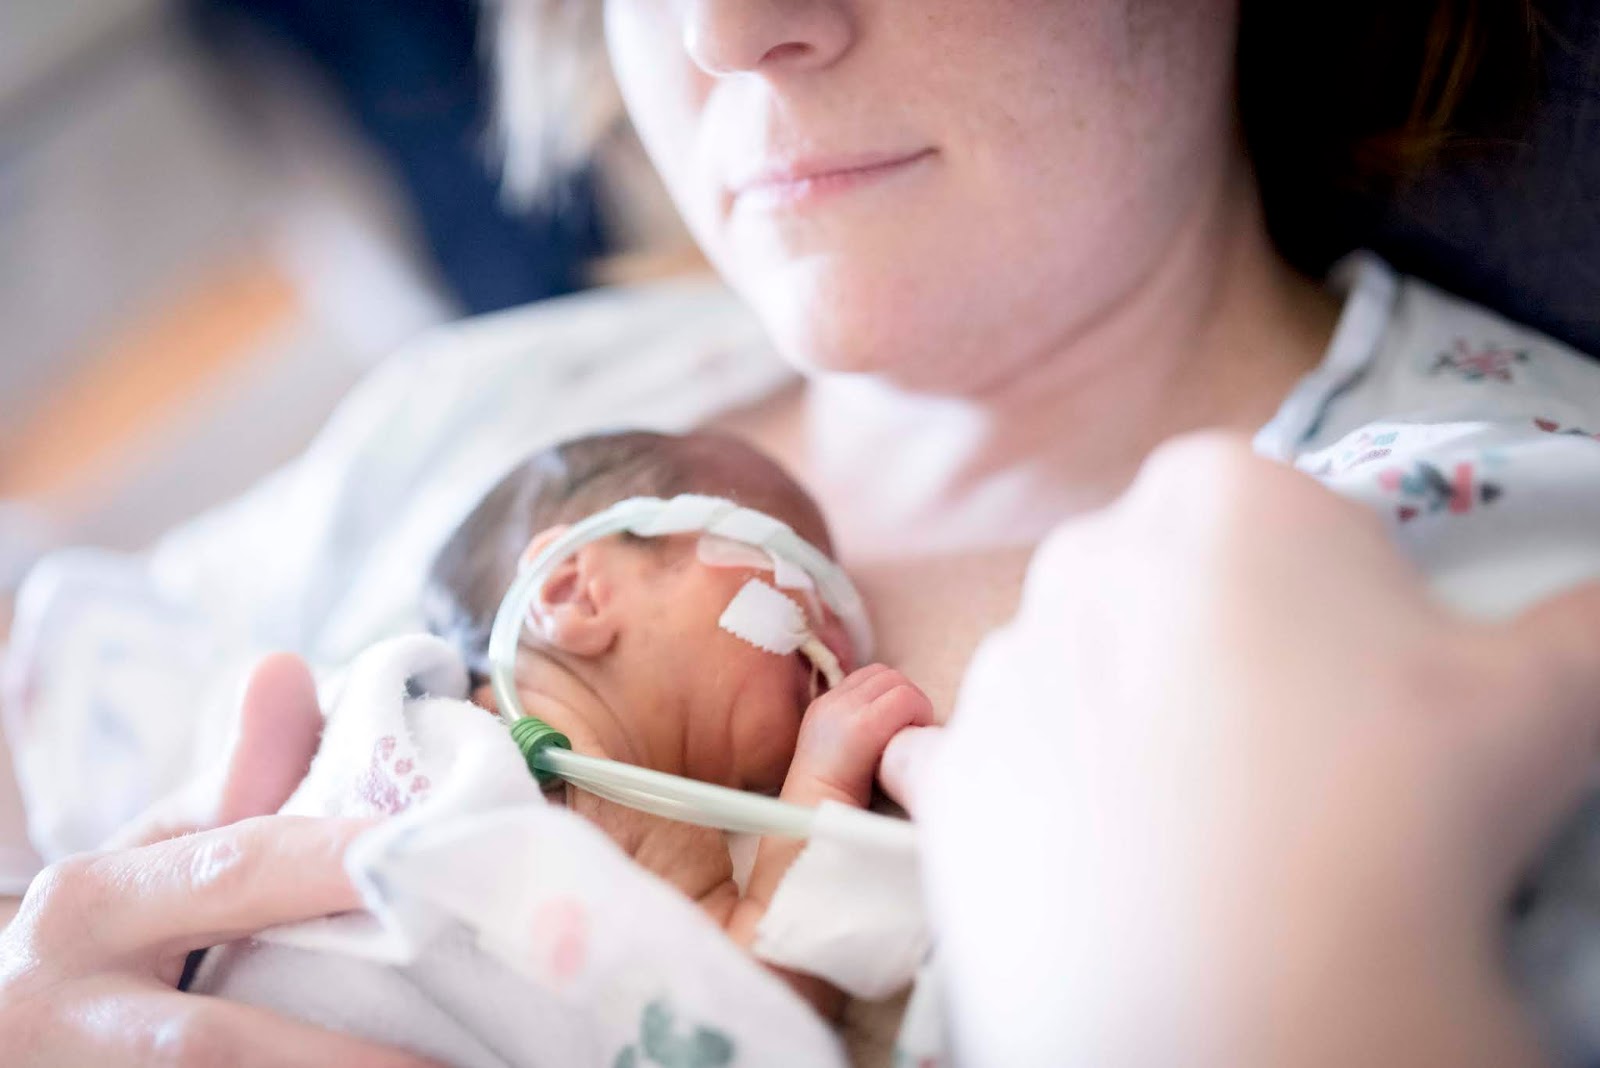 US Hospitals Are Looking For 'Baby Cuddlers' To Comfort Babies Struggling With Opioid Withdrawal